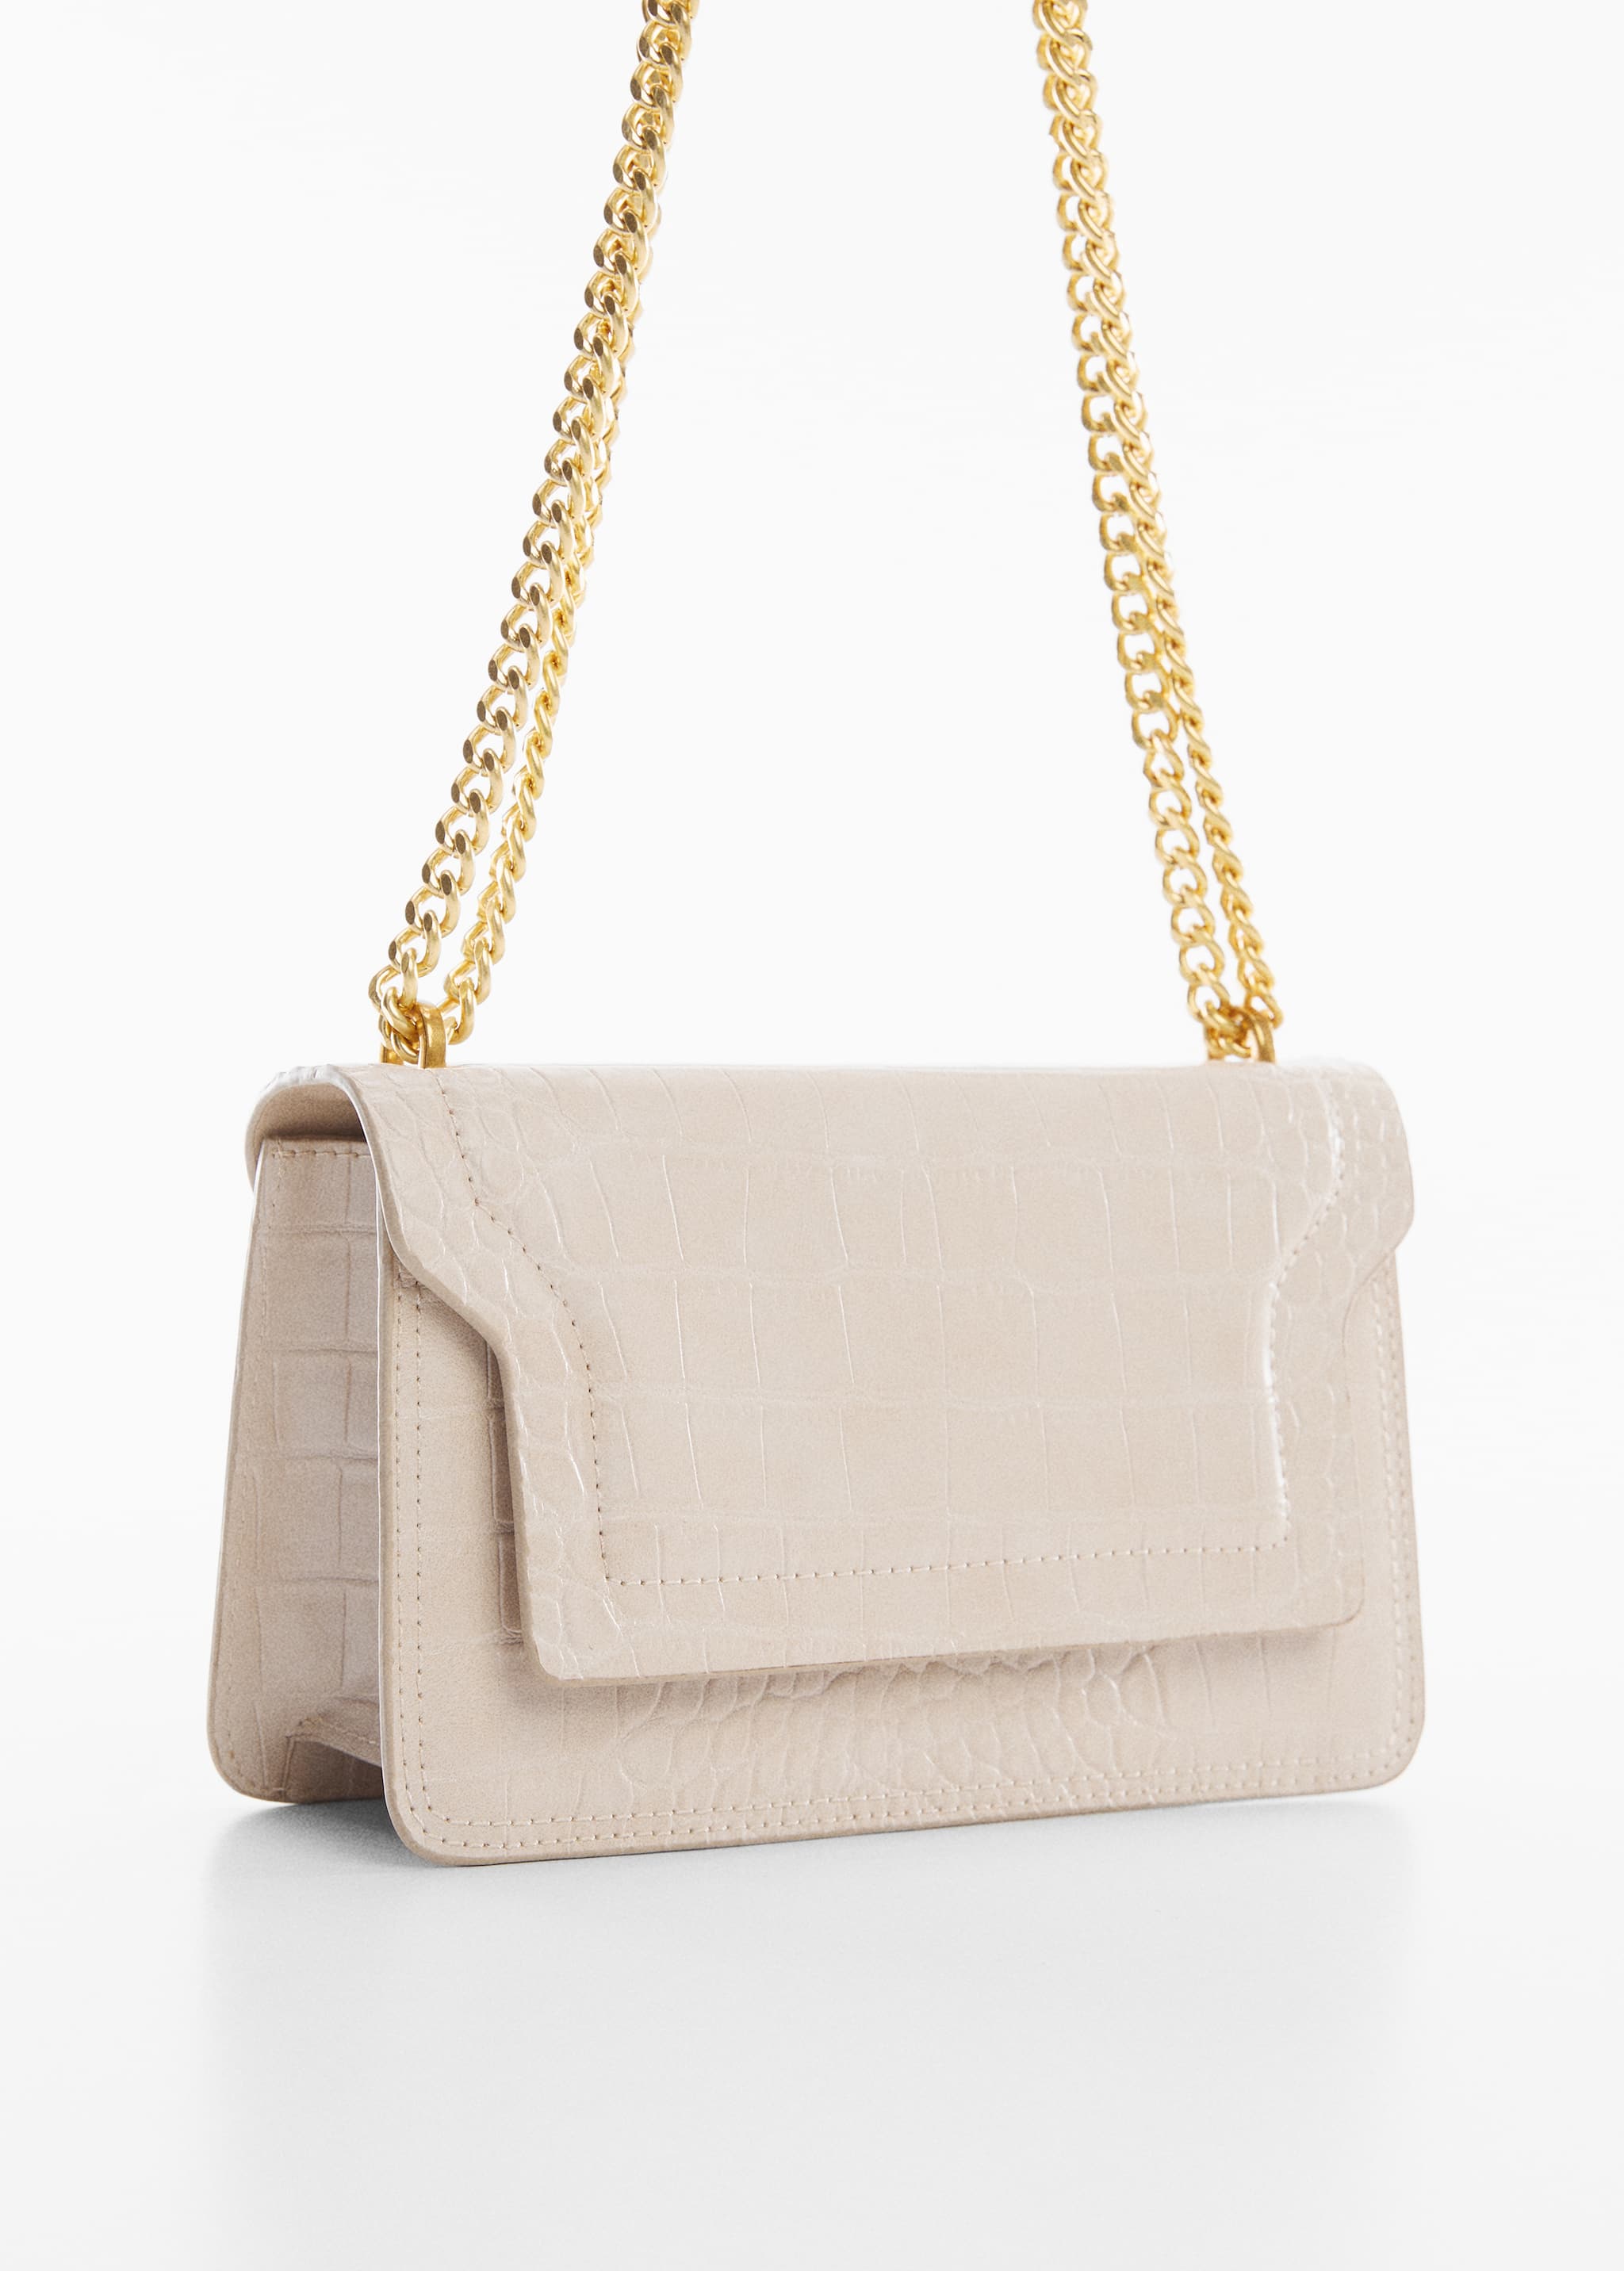 Coco chain bag - Details of the article 1